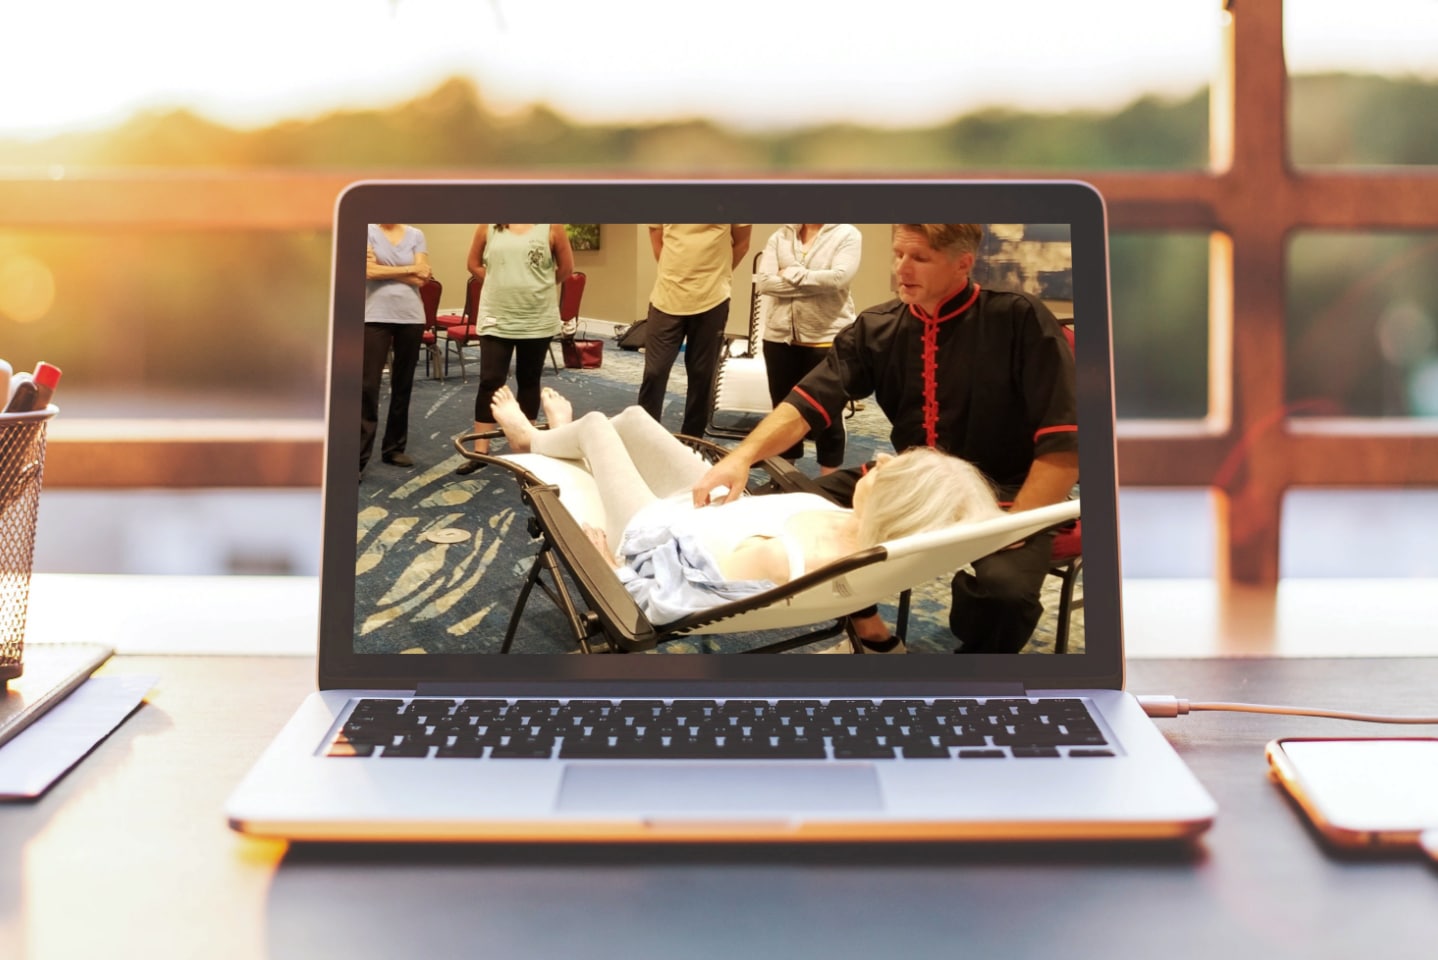 In this photo a laptop computer with a picture of instructor David J. Coon giving a Medical Qigong Treatment to a Workshop Participant